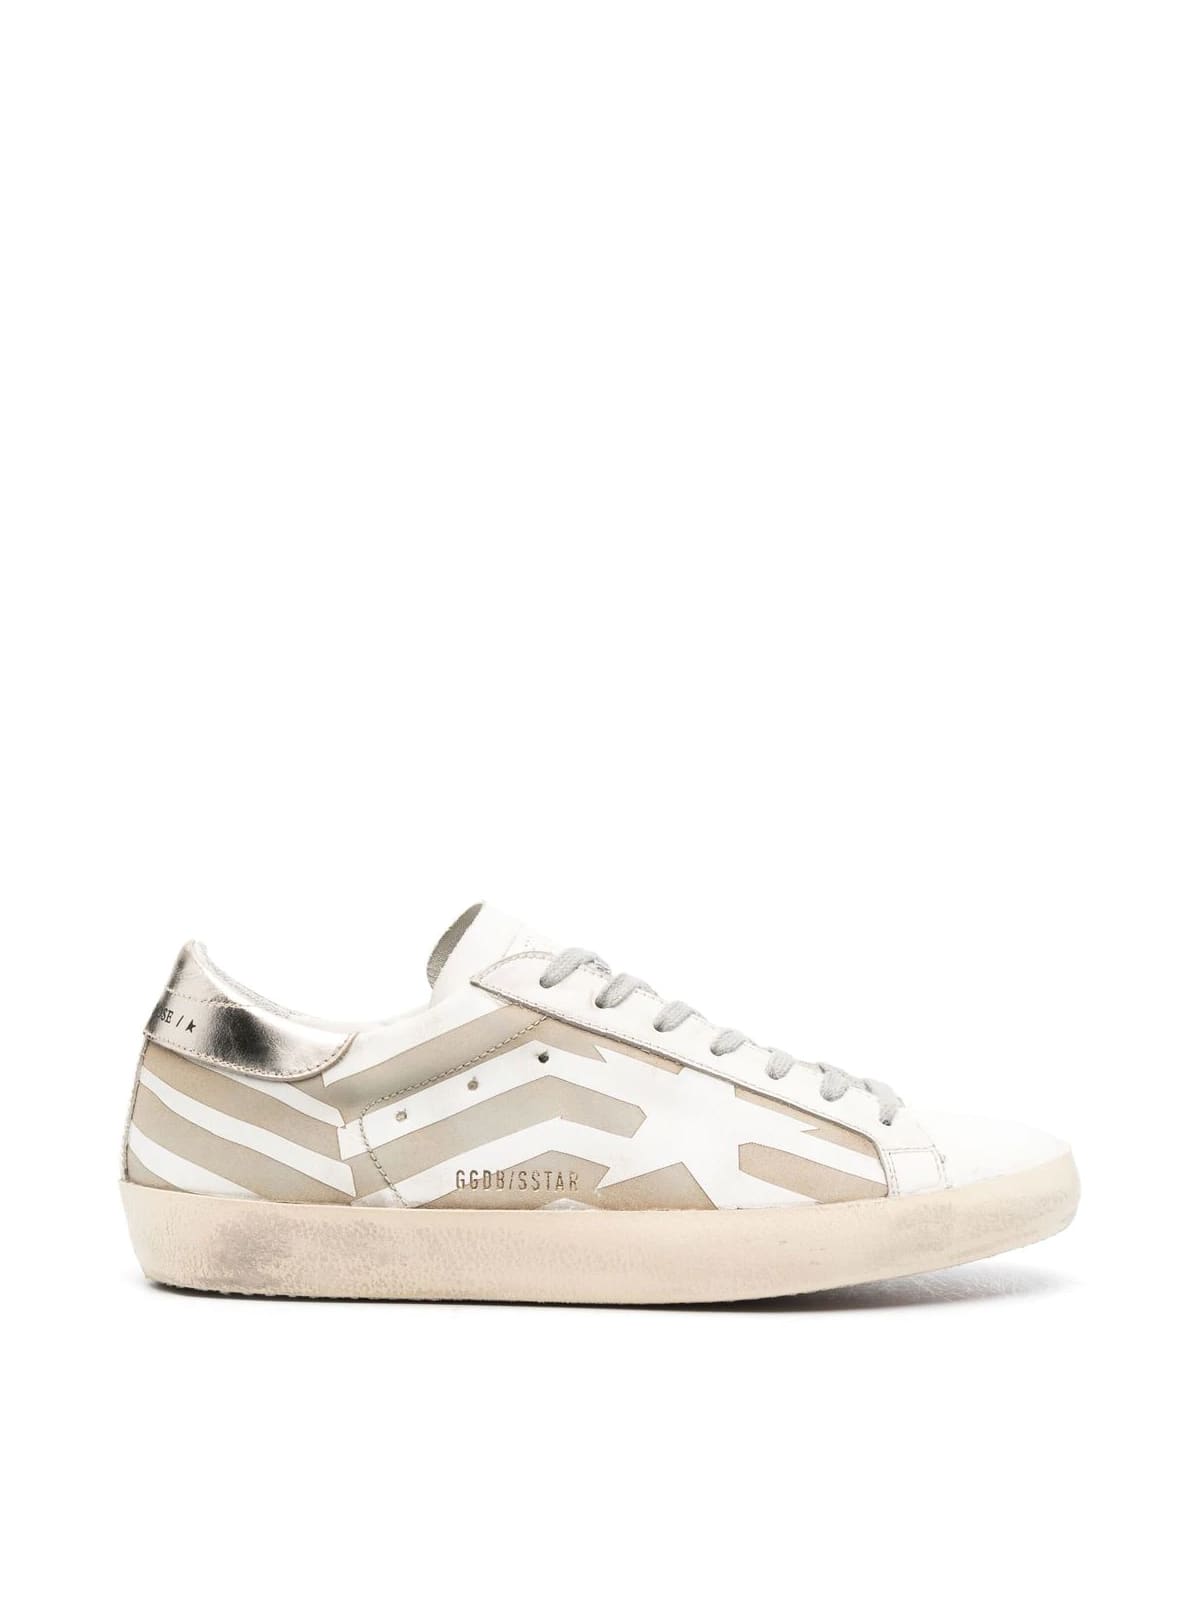 Golden Goose Super Star Leather Upper With Lasercut Flag And Star Suede Toe Laminated Heel